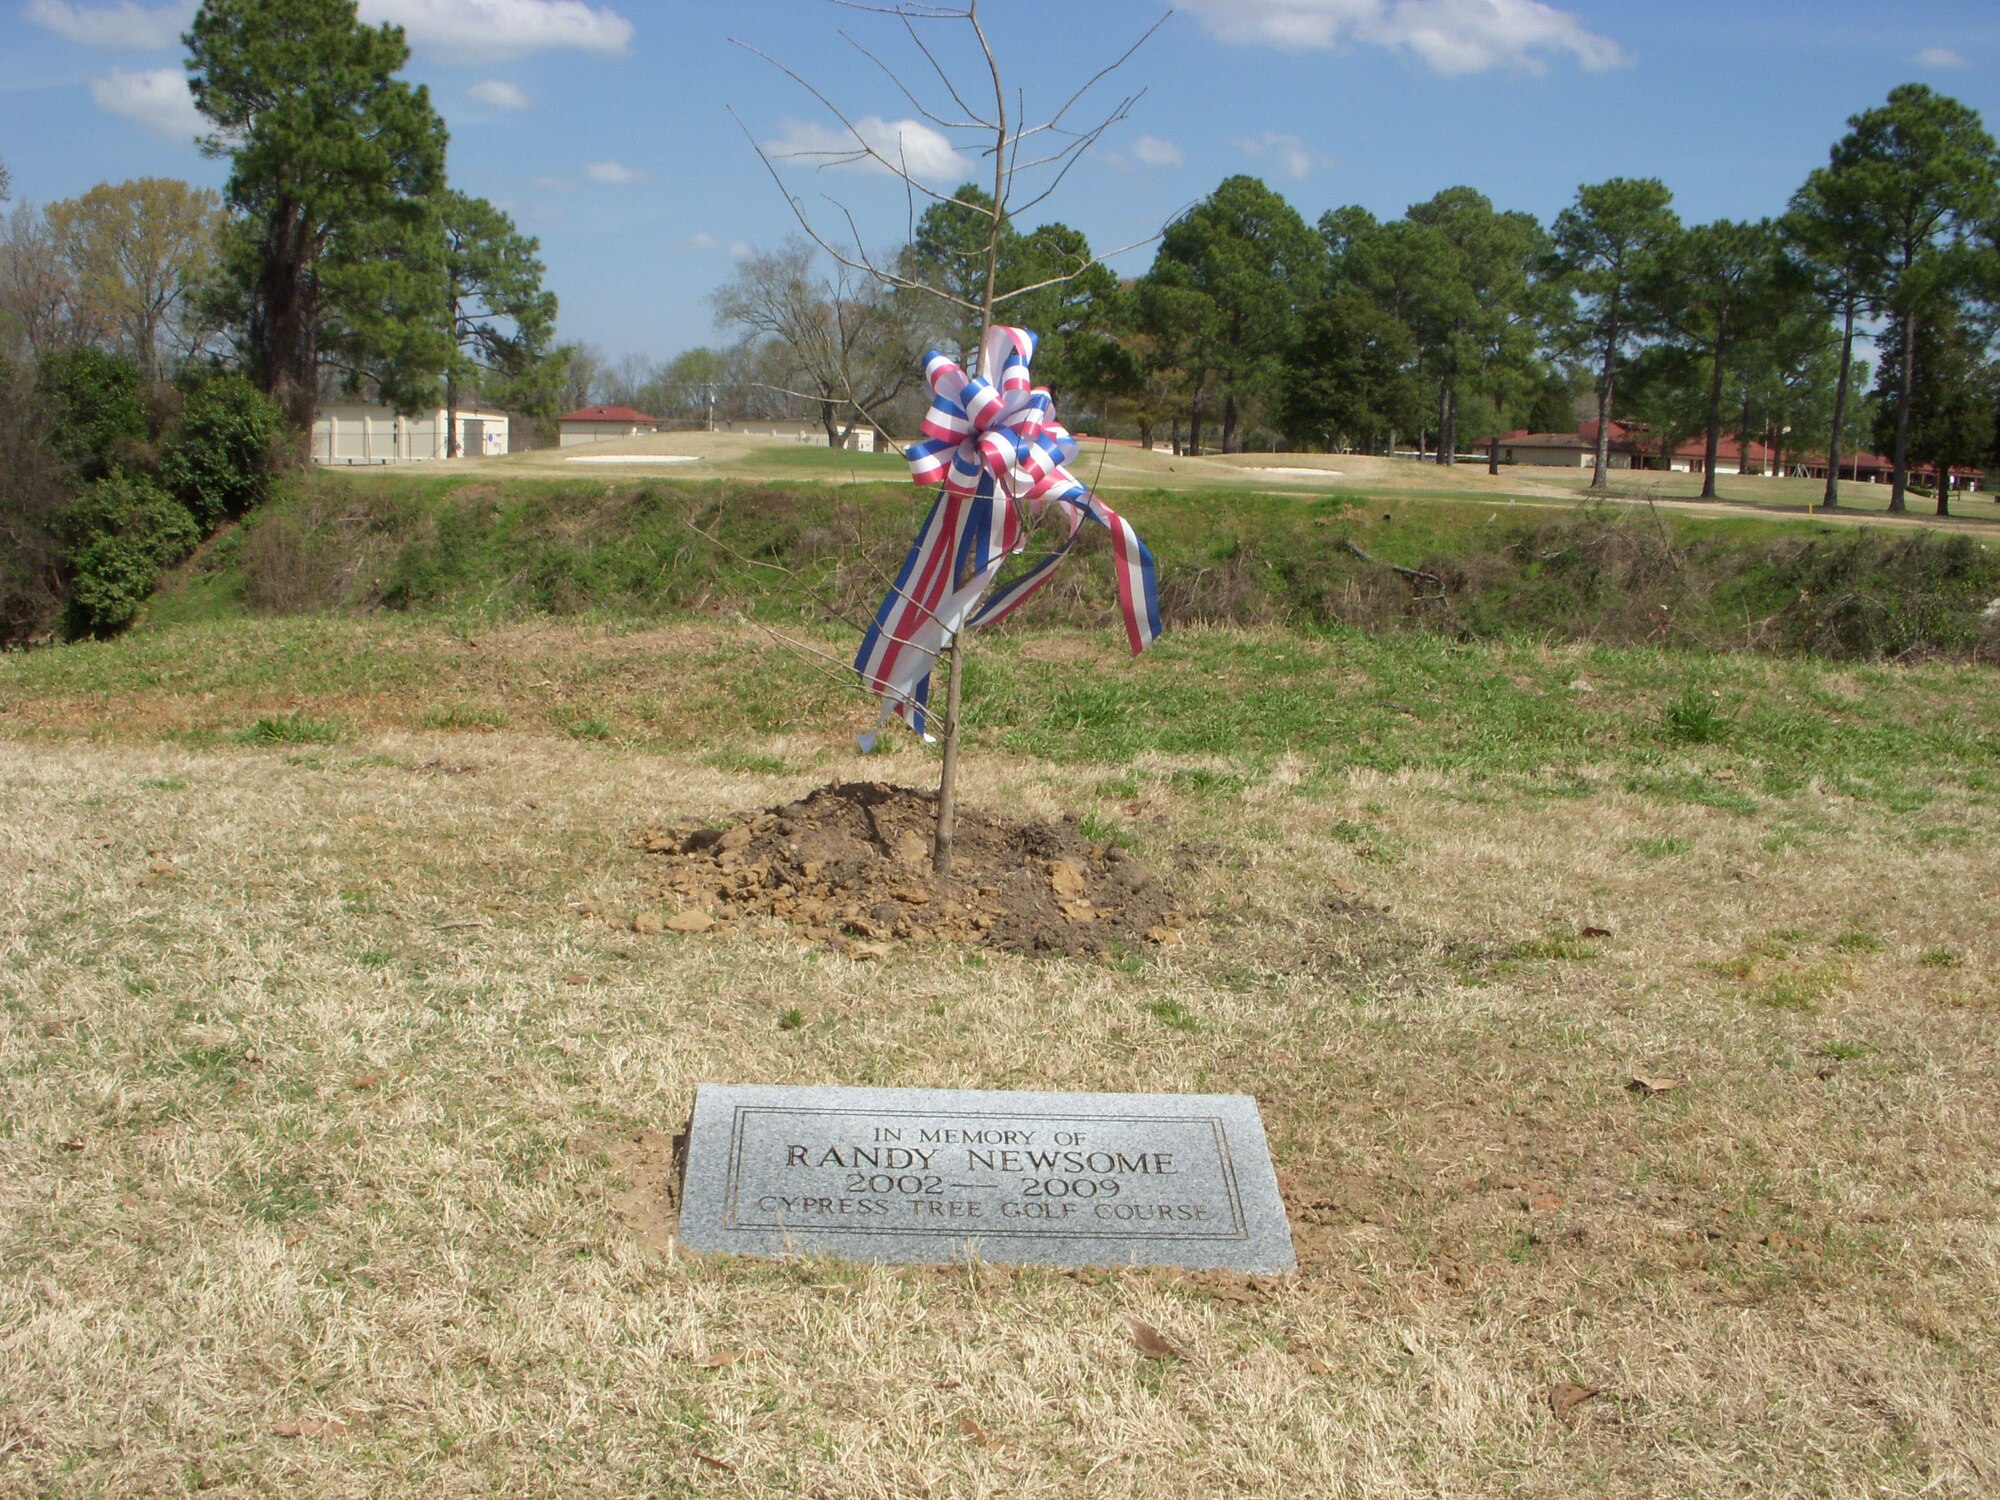 A tree sits near the 18th hole at Maxwell Air Force Base's Cypress Tree Golf Course. Co-workers planted the tree March 5 in memory of Randall C. Newsome, manager of the course, who died Feb. 24. (Air Force photo by Carl Poteat)